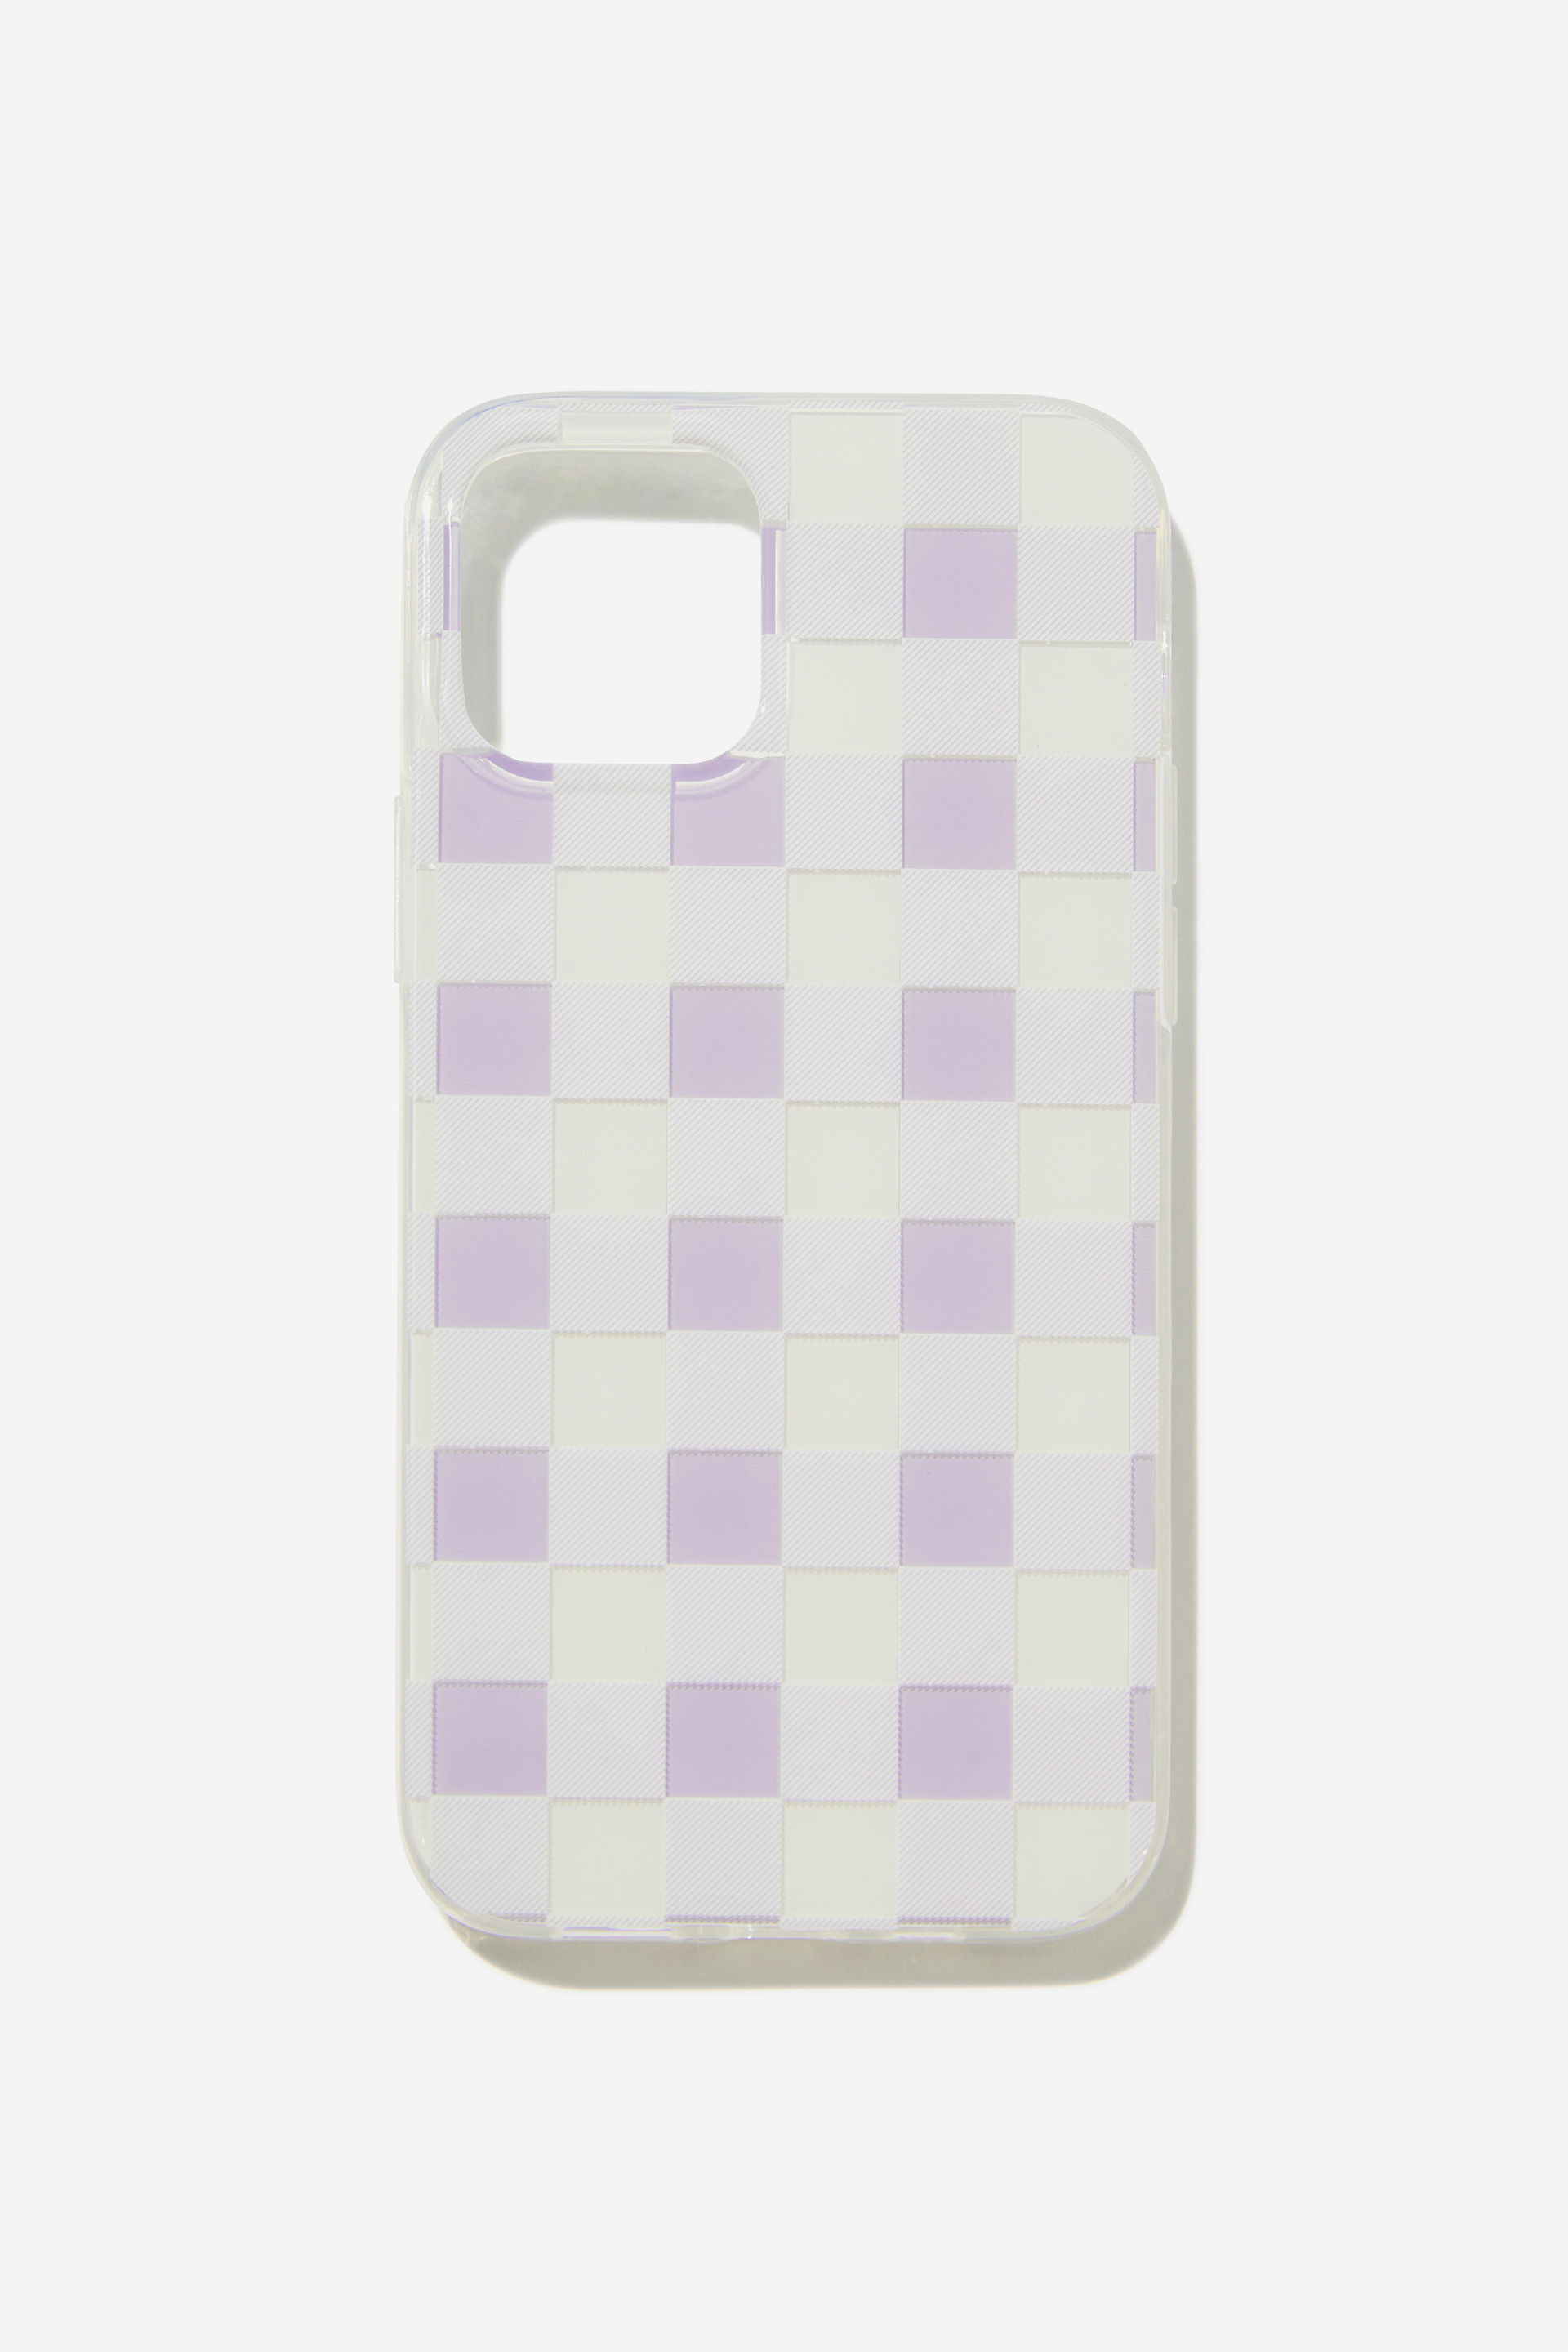 Typo - Graphic Phone Case Iphone 12-12 Pro - Soft lilac gingham